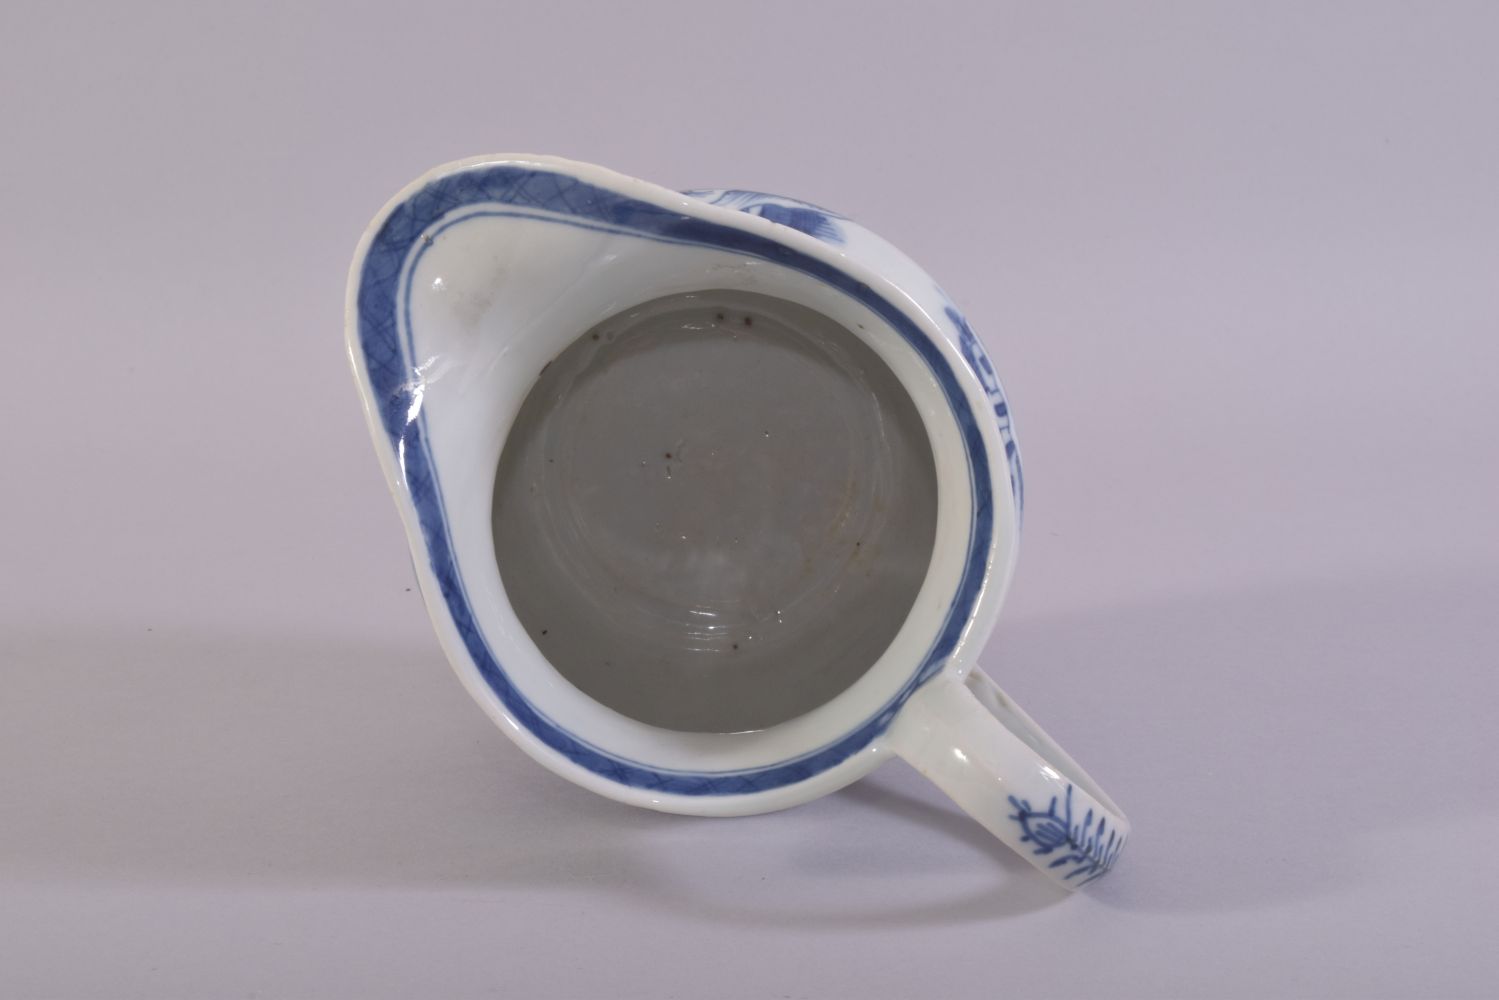 A CHINESE BLUE AND WHITE PORCELAIN JUG, decorated with a landscape scene depicting buildings, - Image 5 of 6